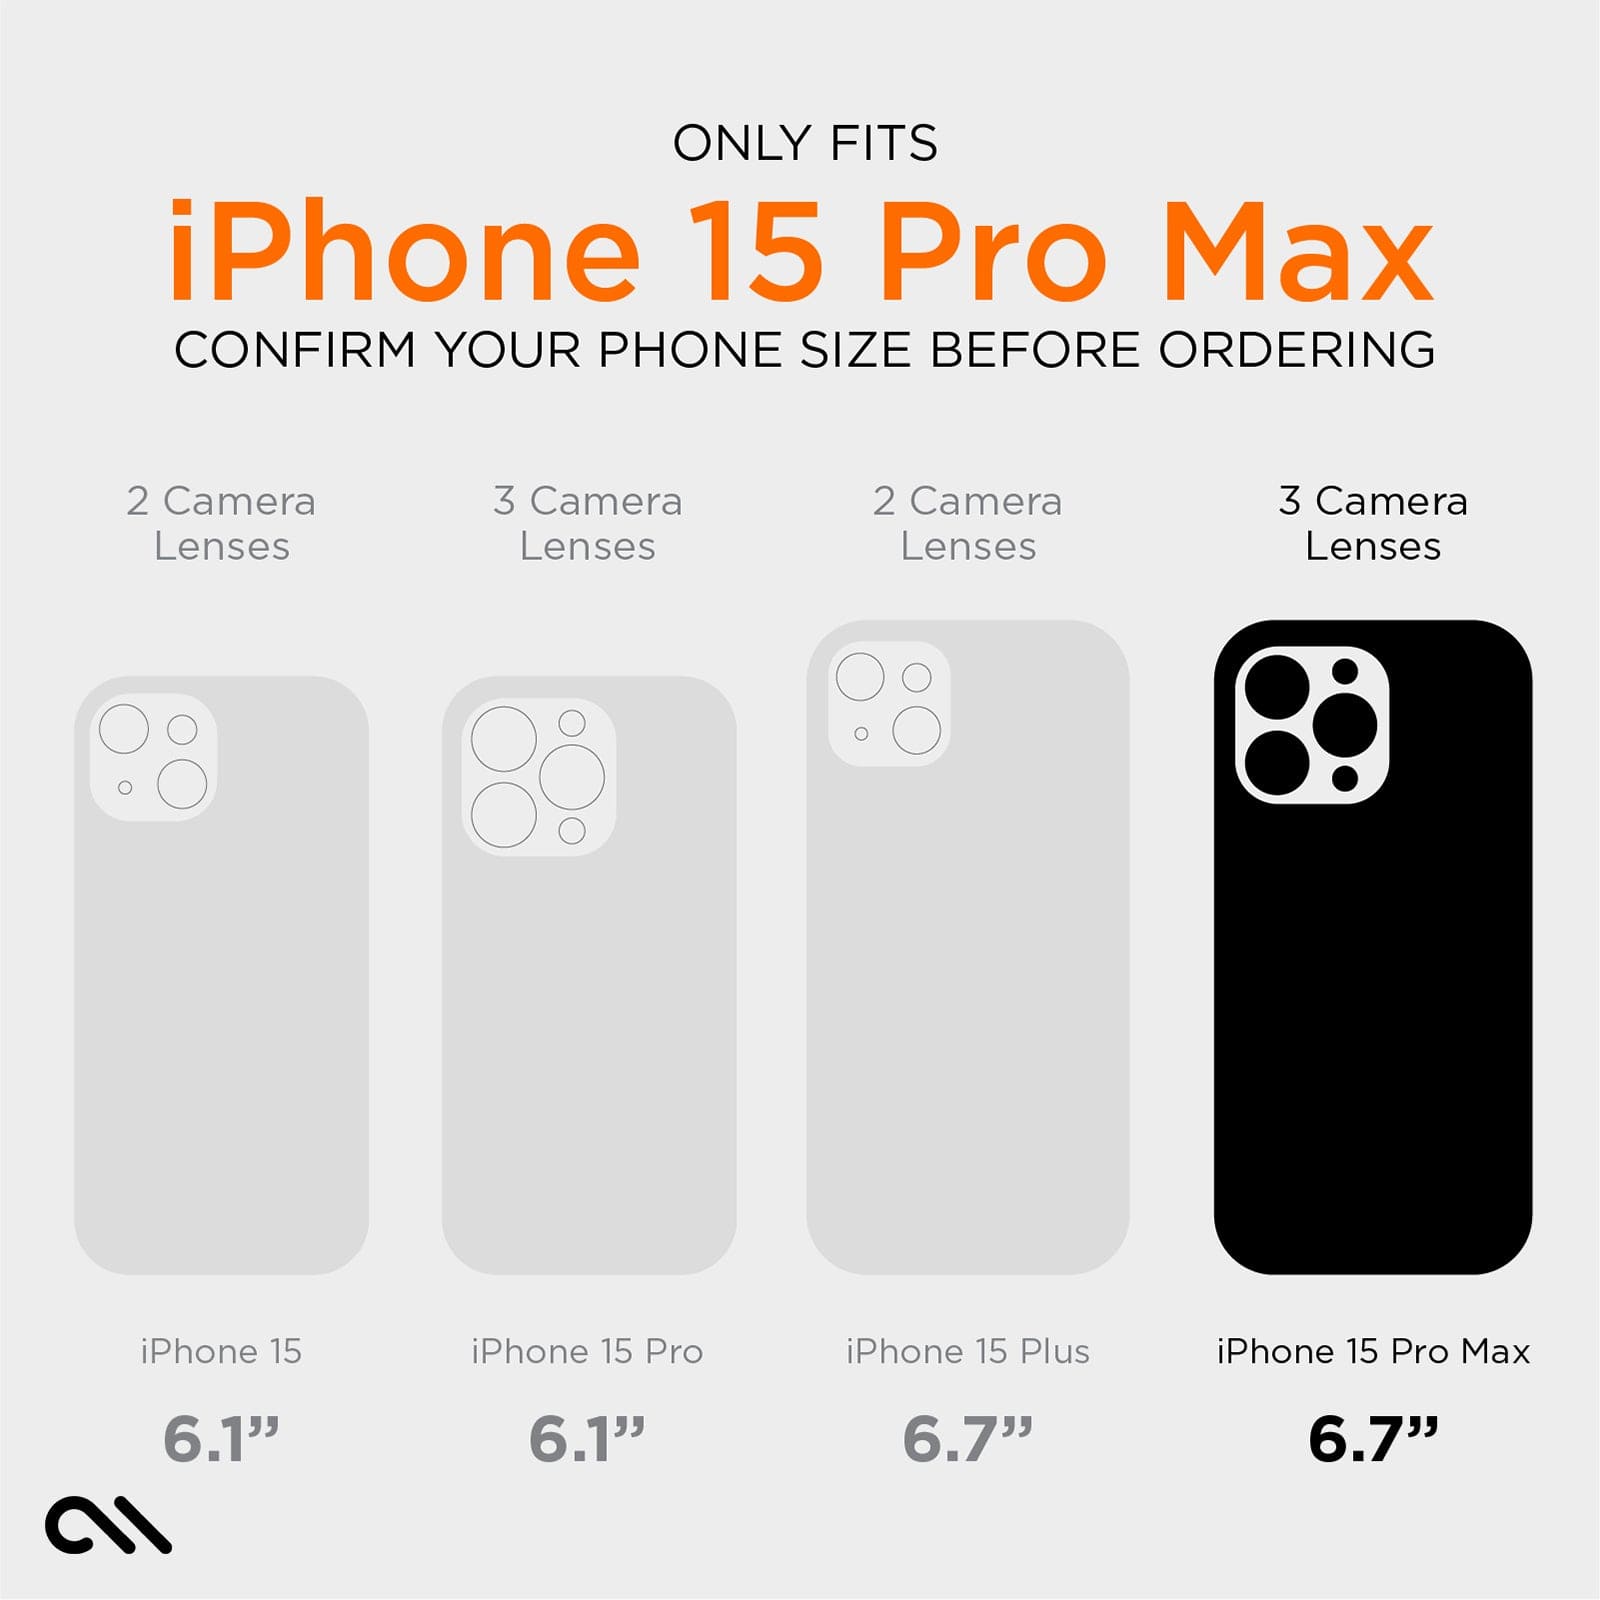 ONLY FITS IPHONE 15 PRO MAX CONFIRM YOUR PHONE SIZE BEFORE ORDERING